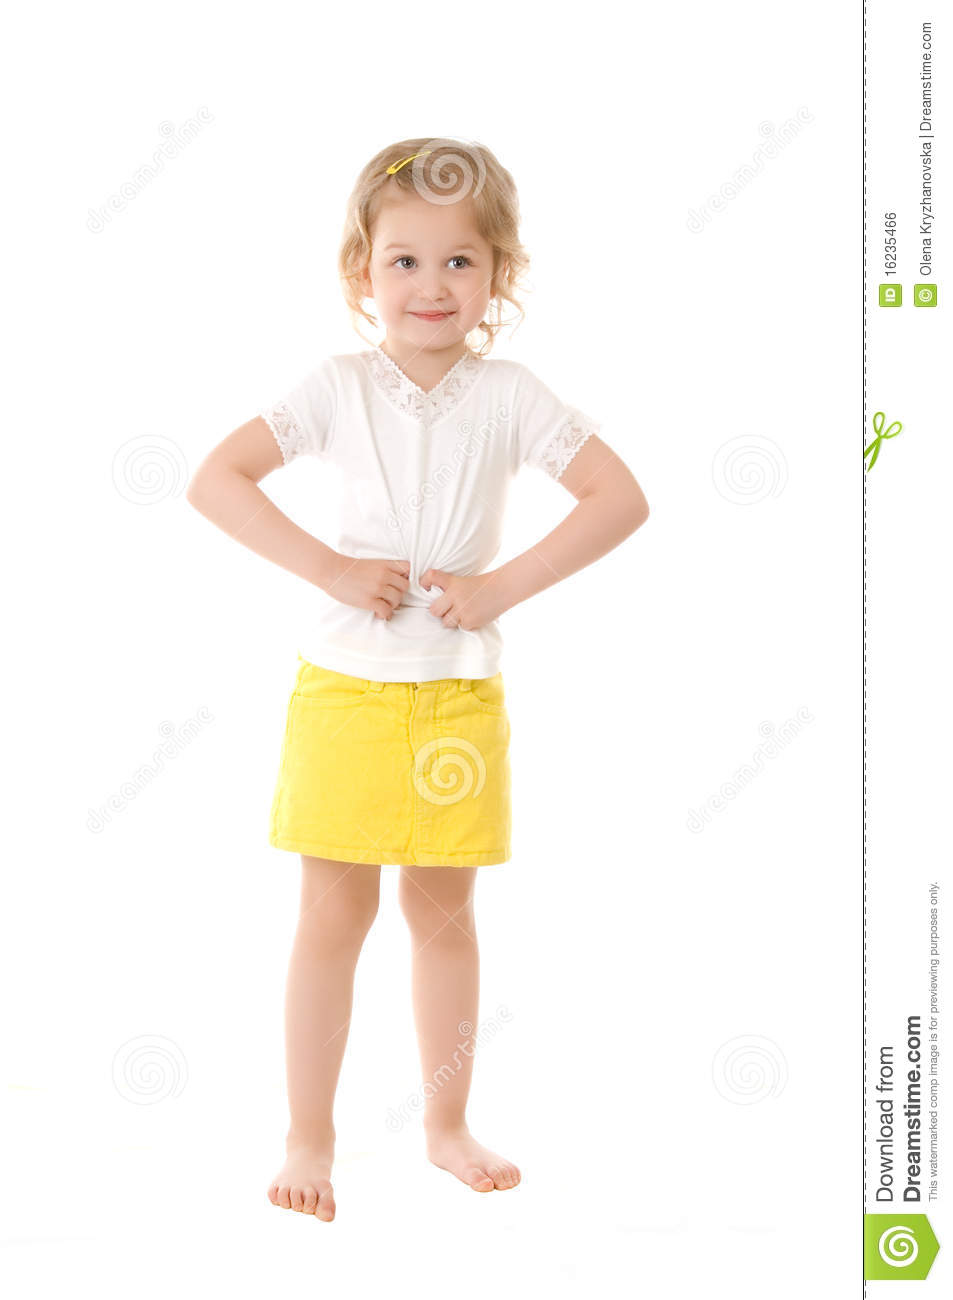 Shy Little Girl Standing On White Background Royalty Free Stock Image    